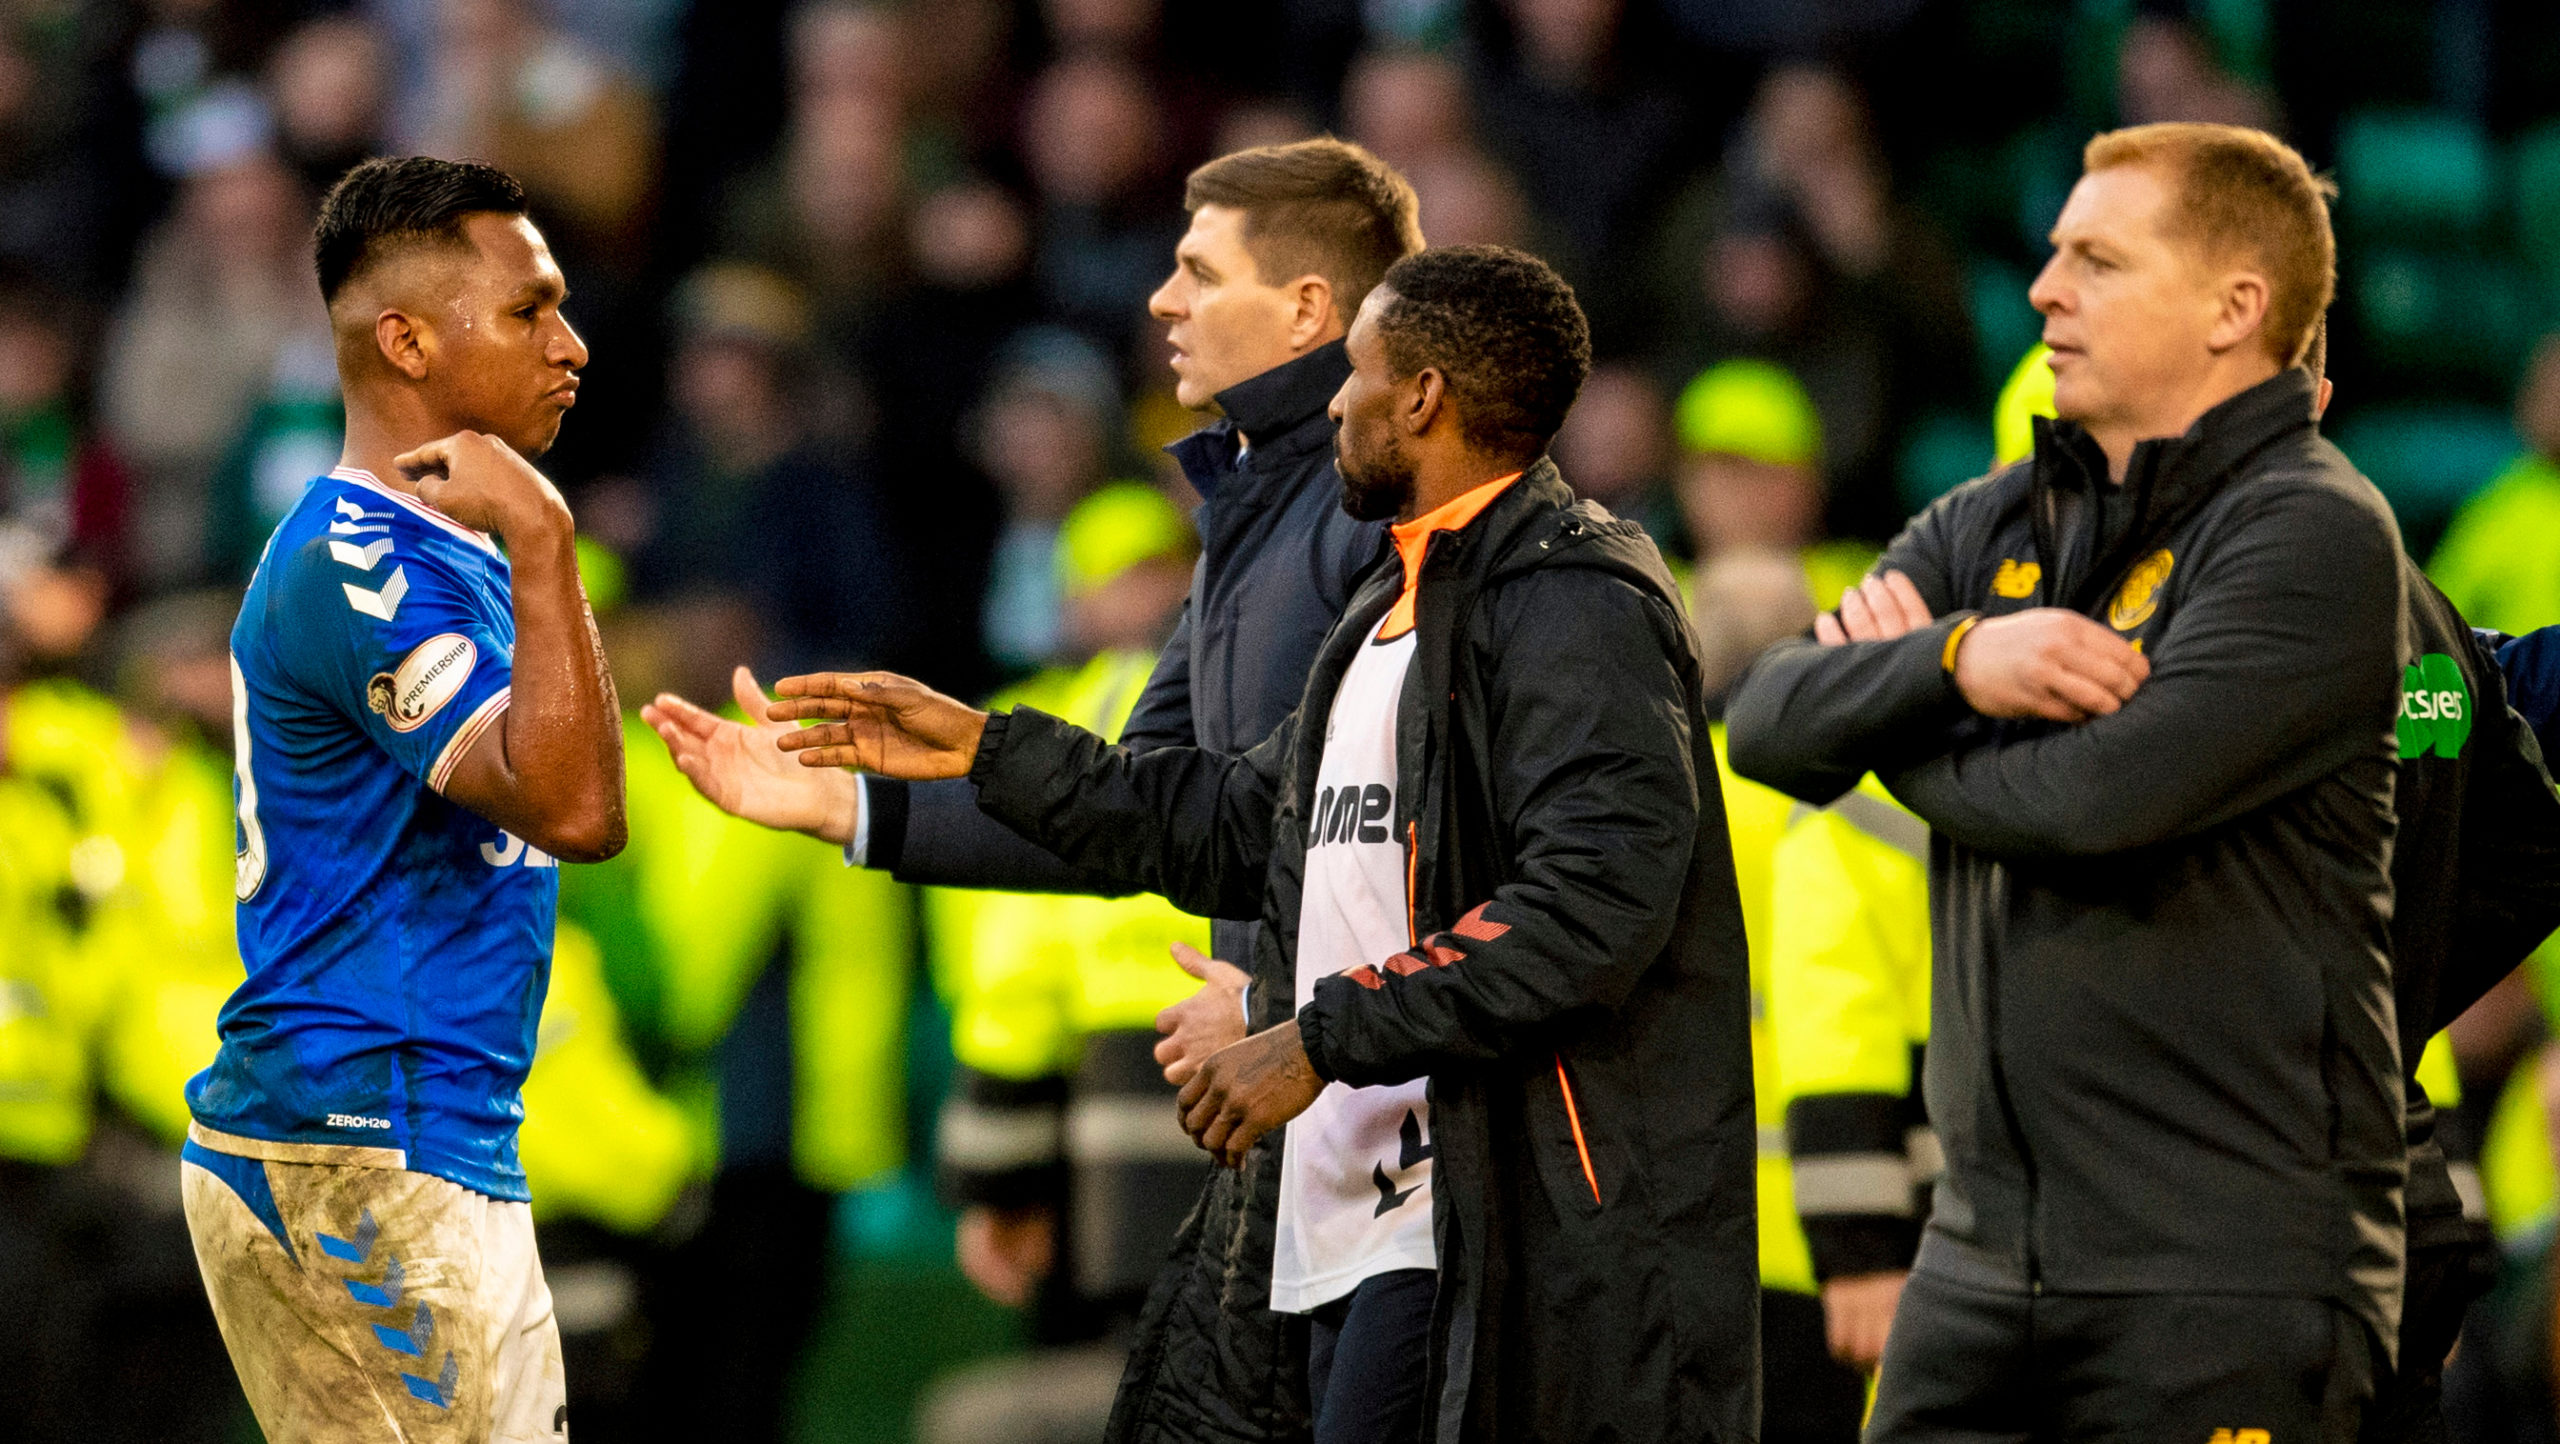 Rangers said Morelos' gesture was to indicate that the game was over.